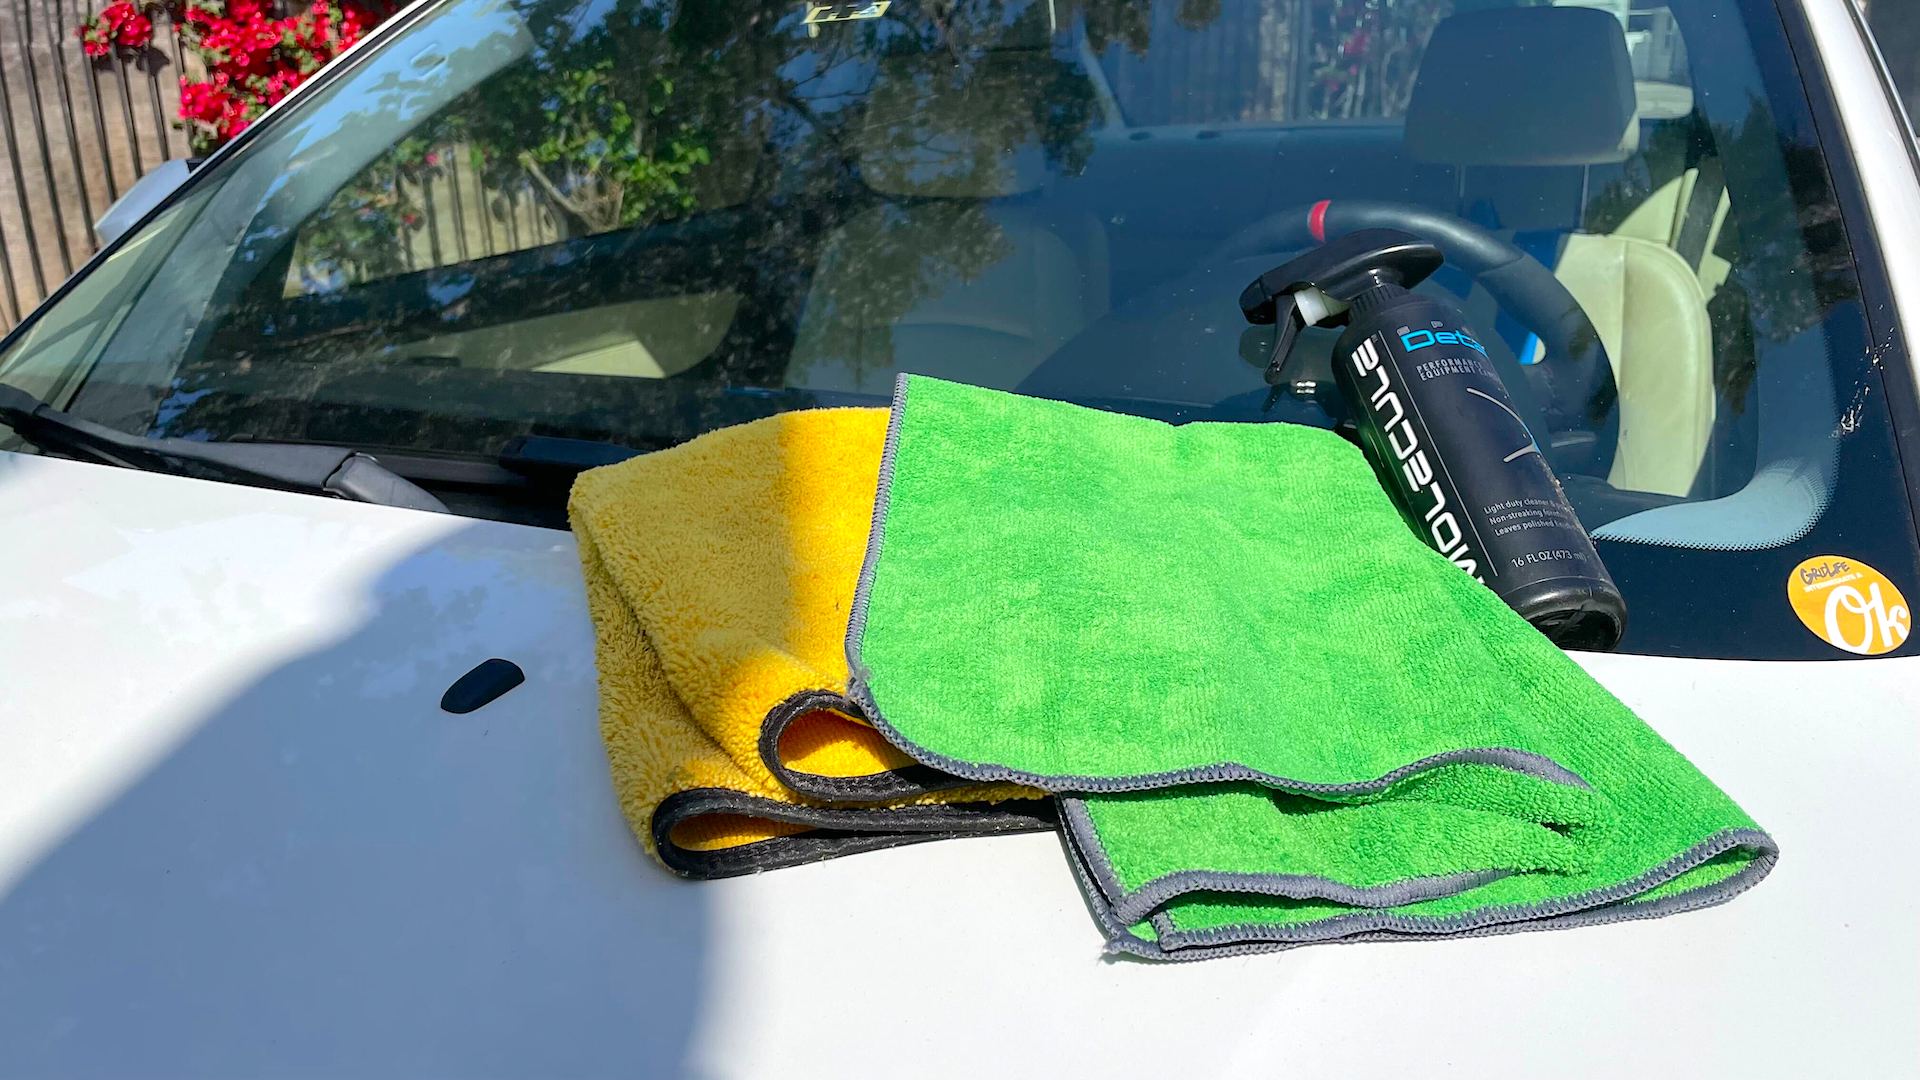 Best Microfiber Towel for Cars - Our Expert Review!